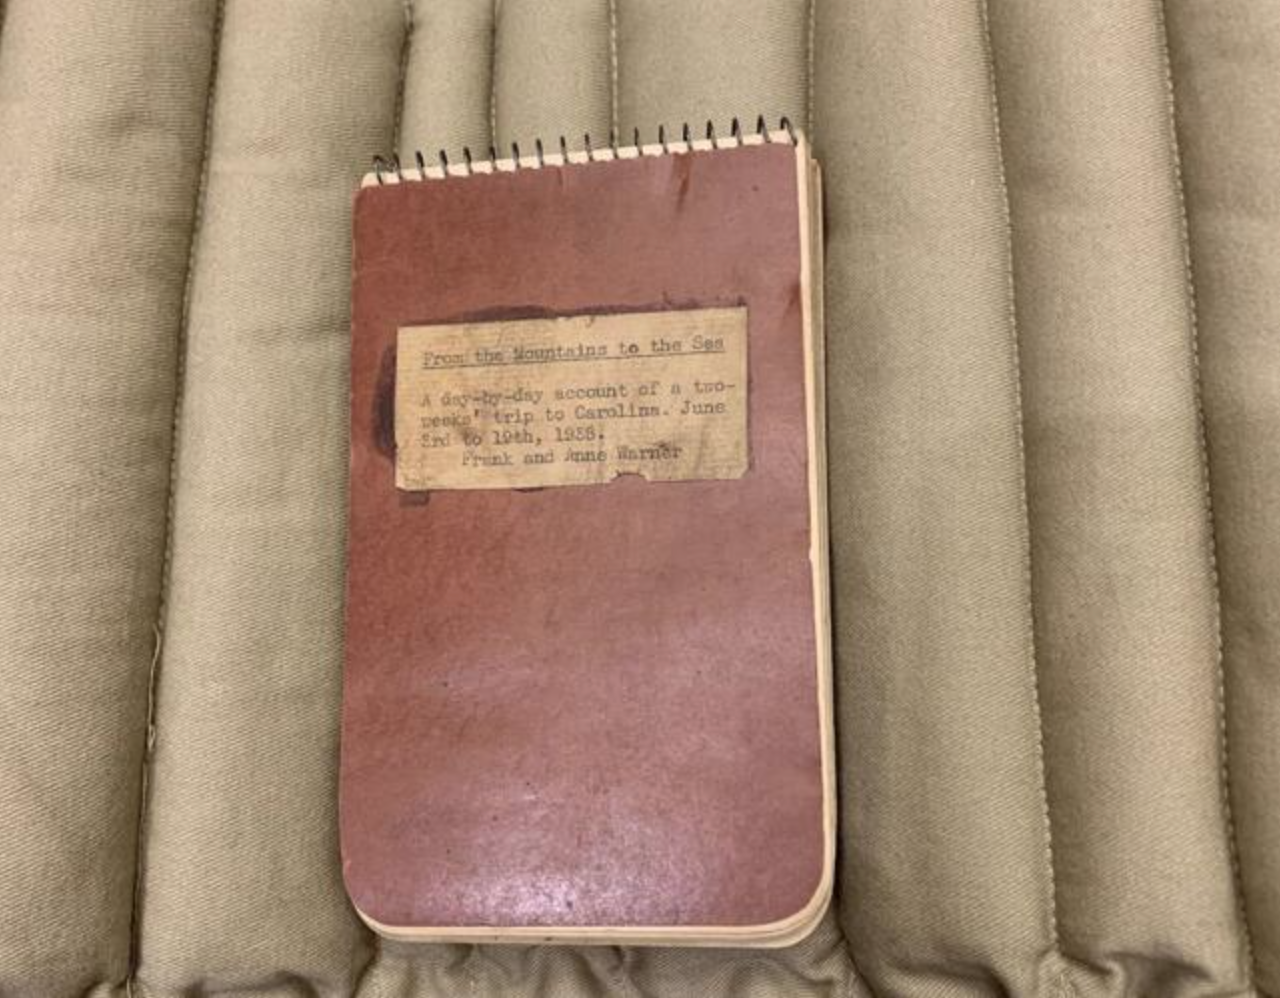 Frank and Anne Warner’s diary